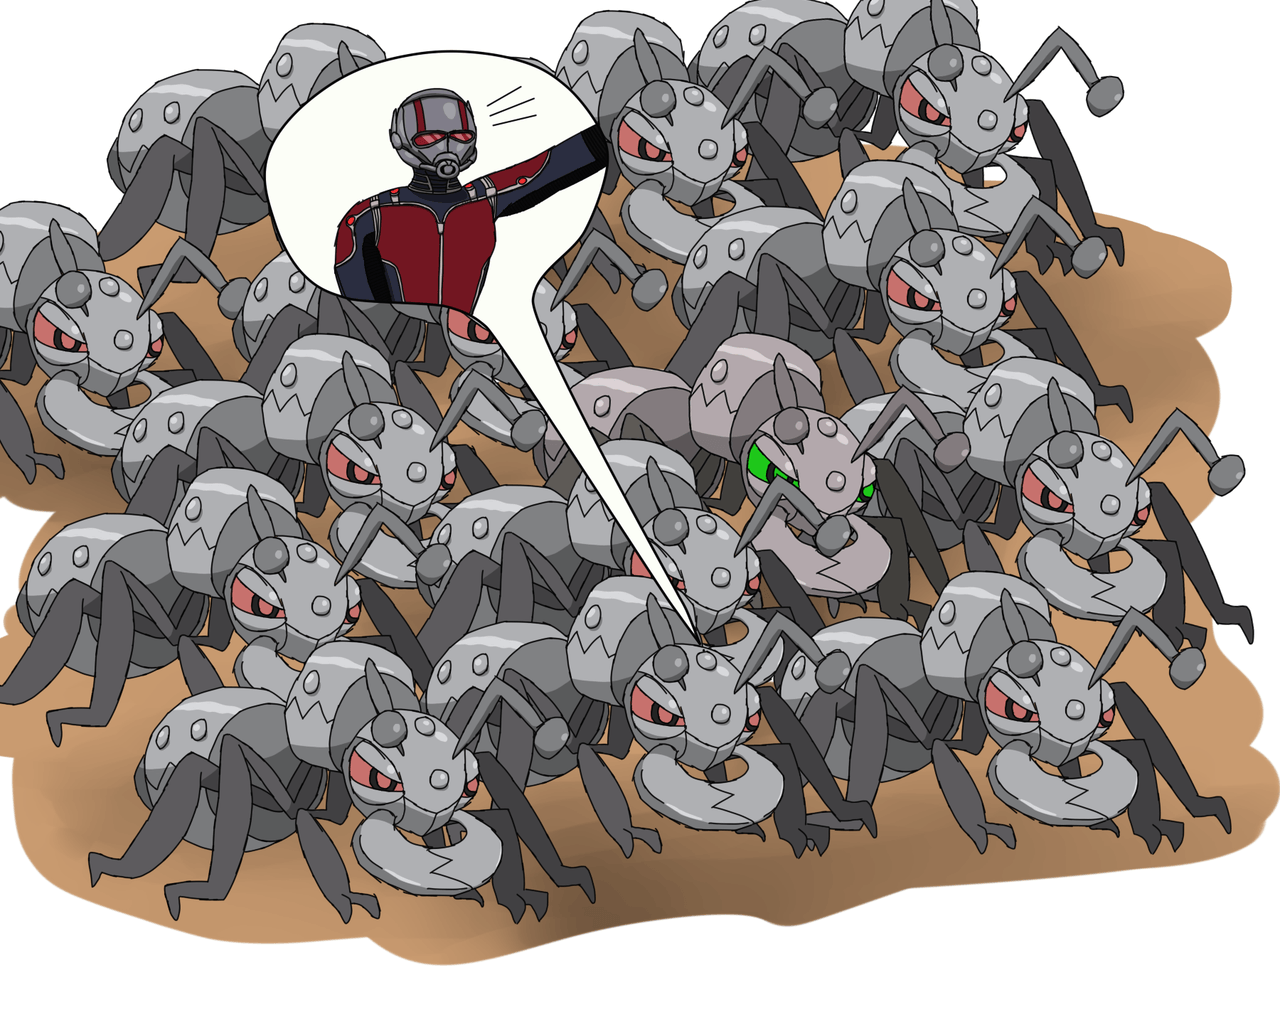 Ant Man In Lots Of Backup Durant By Deaf Machbot Man In Lots Of Backup Durant By Deaf Machbot HD Pokemon Wallpaper